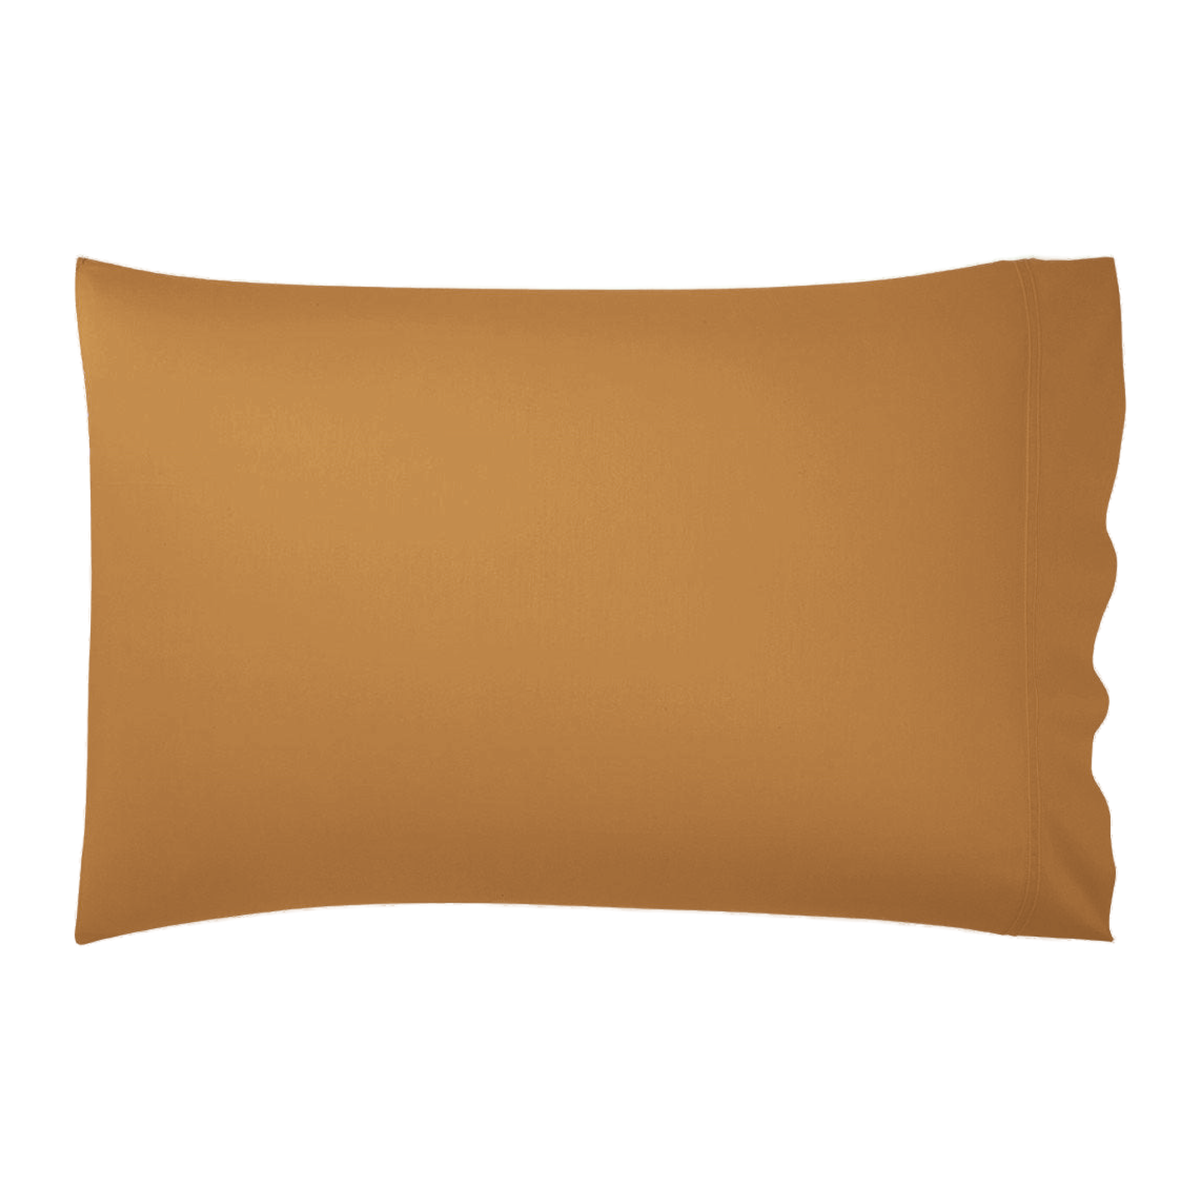 Pillowcase of Yves Delorme Triomphe Sheet Sets in Bronze Color